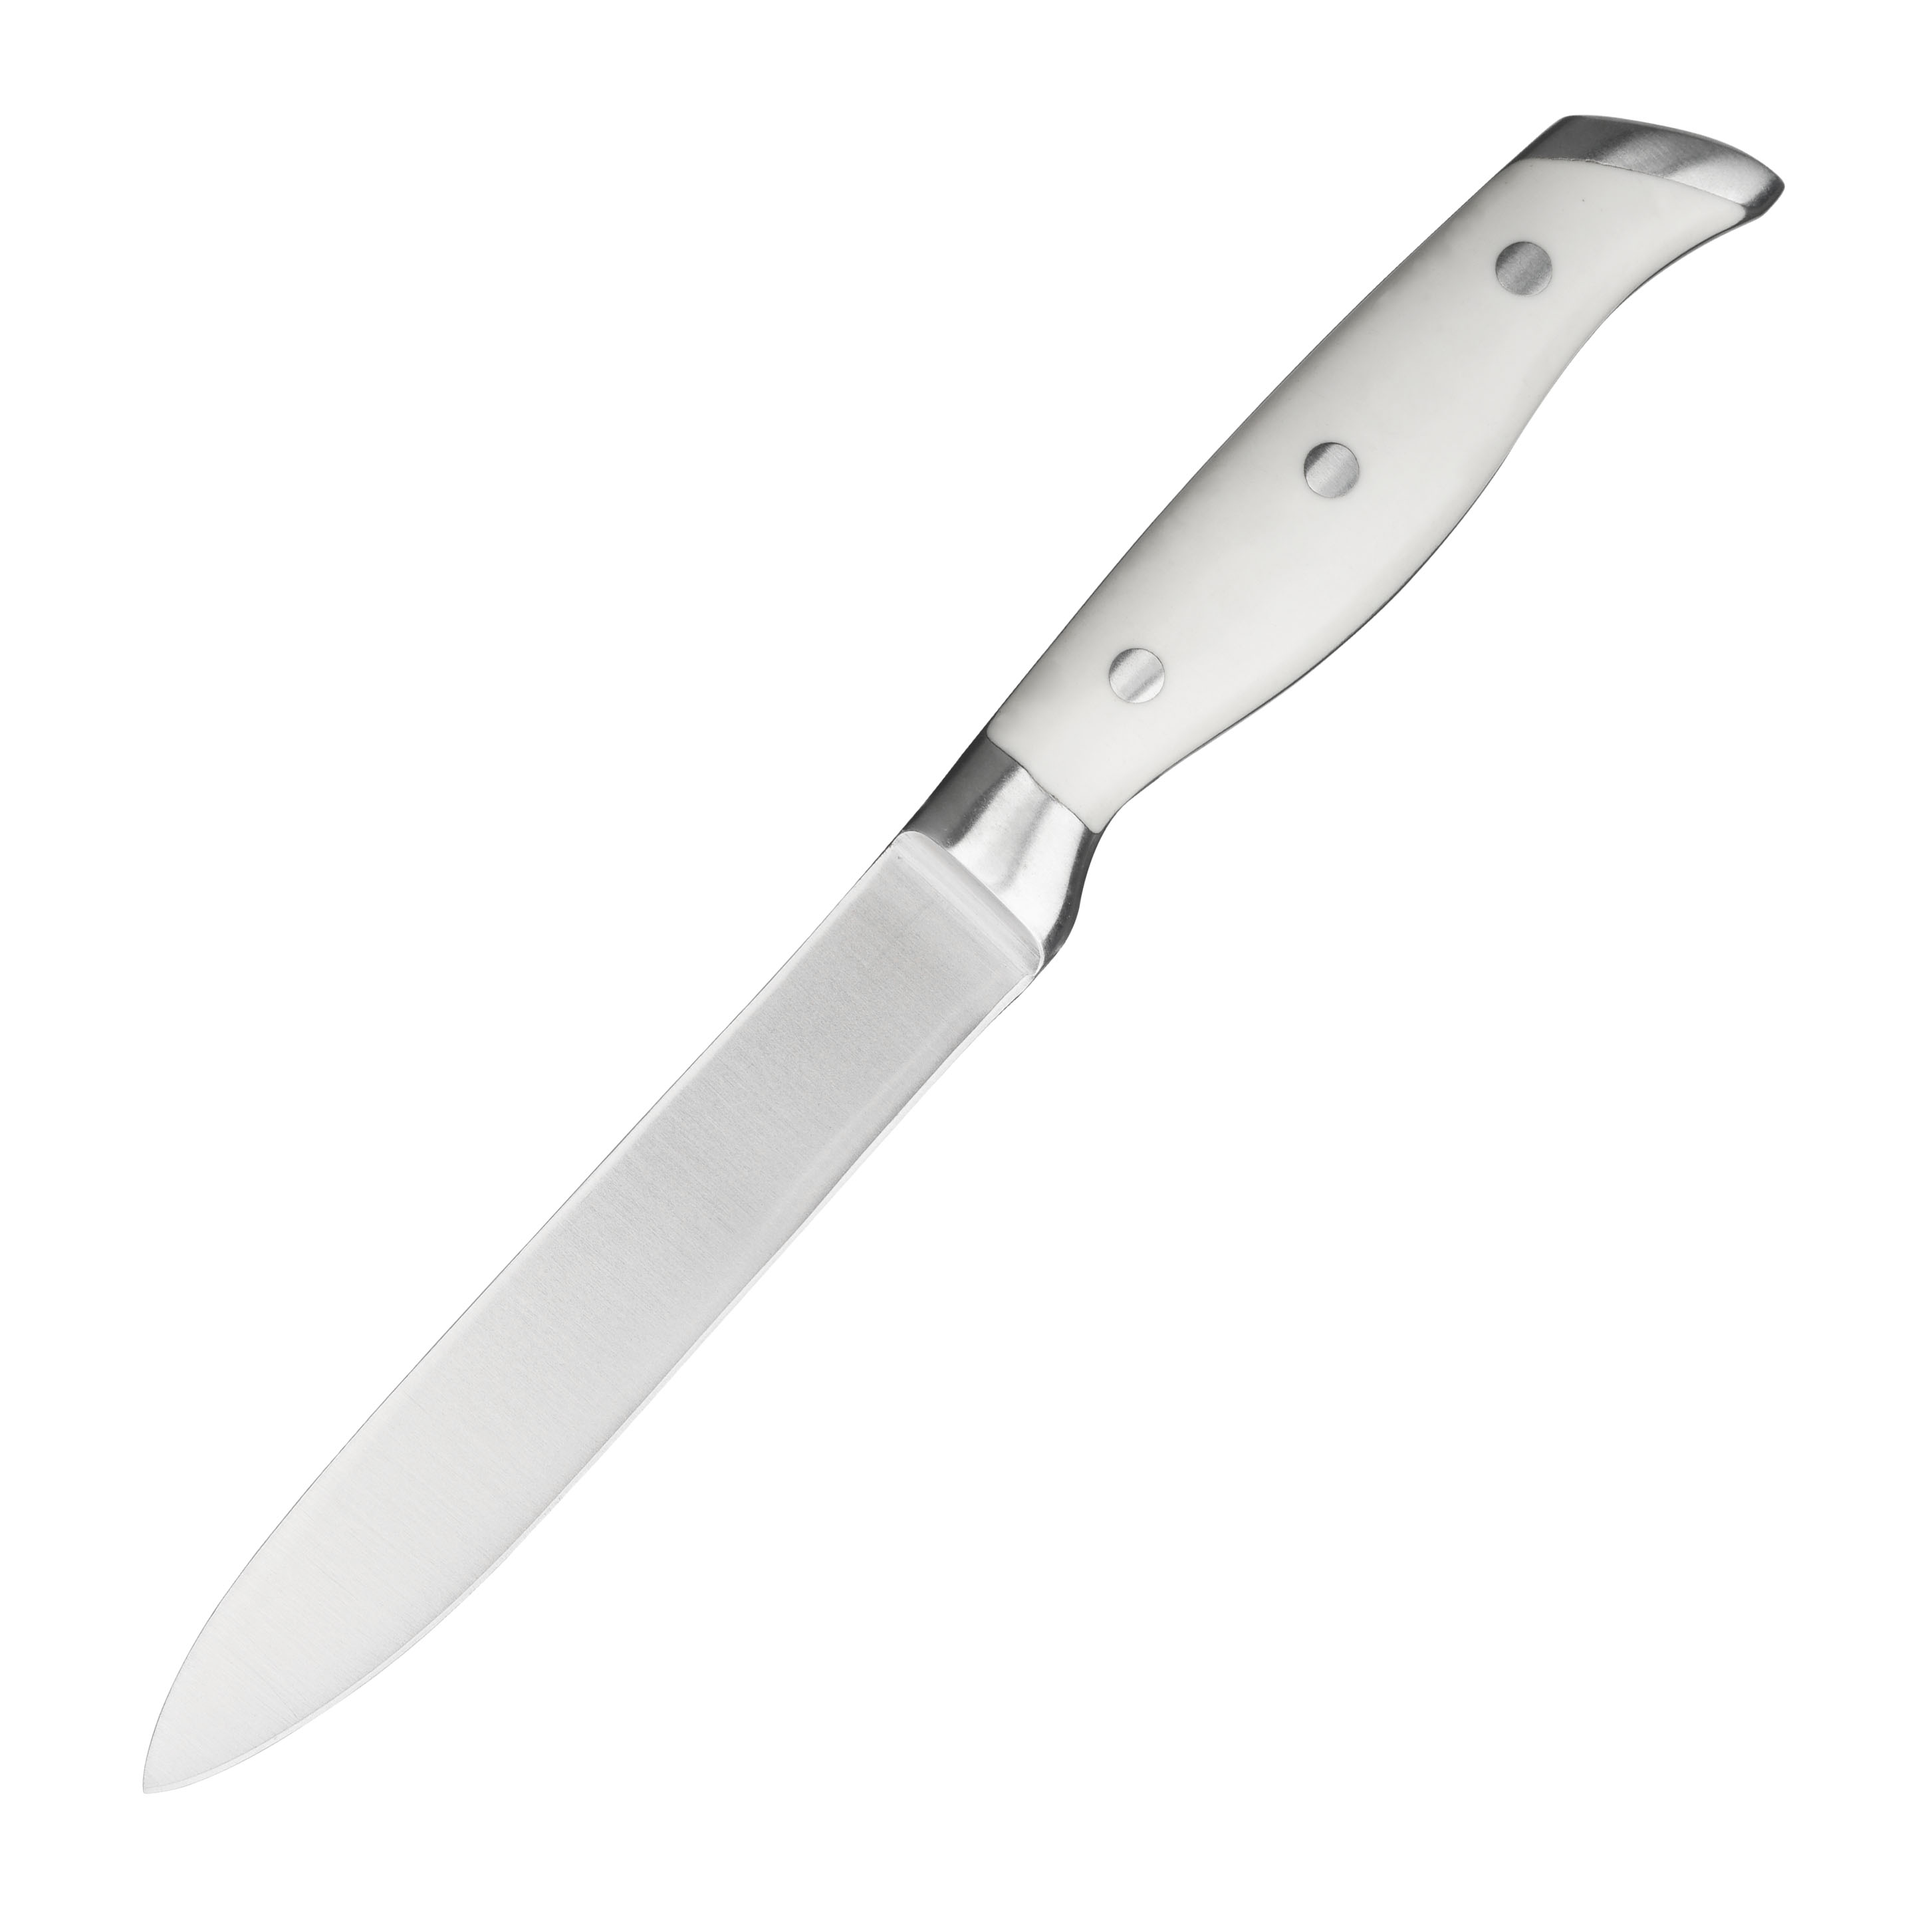 Jourmet Utility Knife on display, highlighting its versatile stainless steel blade and ergonomic handle, suitable for multiple kitchen tasks.